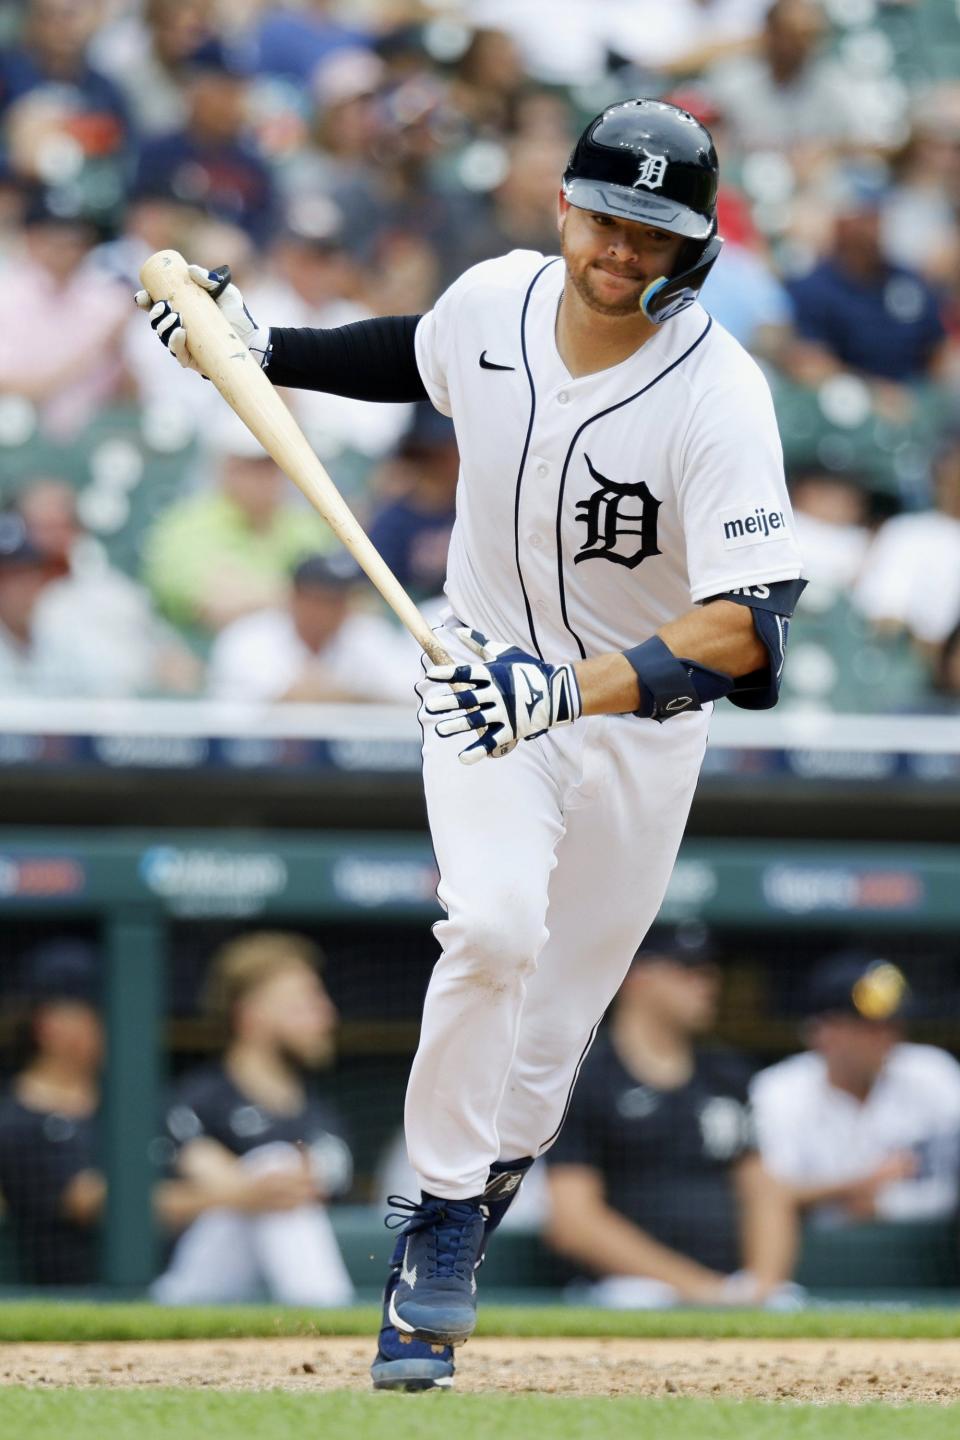 Jake Rogers #34 of the Detroit Tigers reacts after an at-bat in the eighth inning against the Minnesota Twins at Comerica Park on June 25, 2023 in Detroit, Michigan.